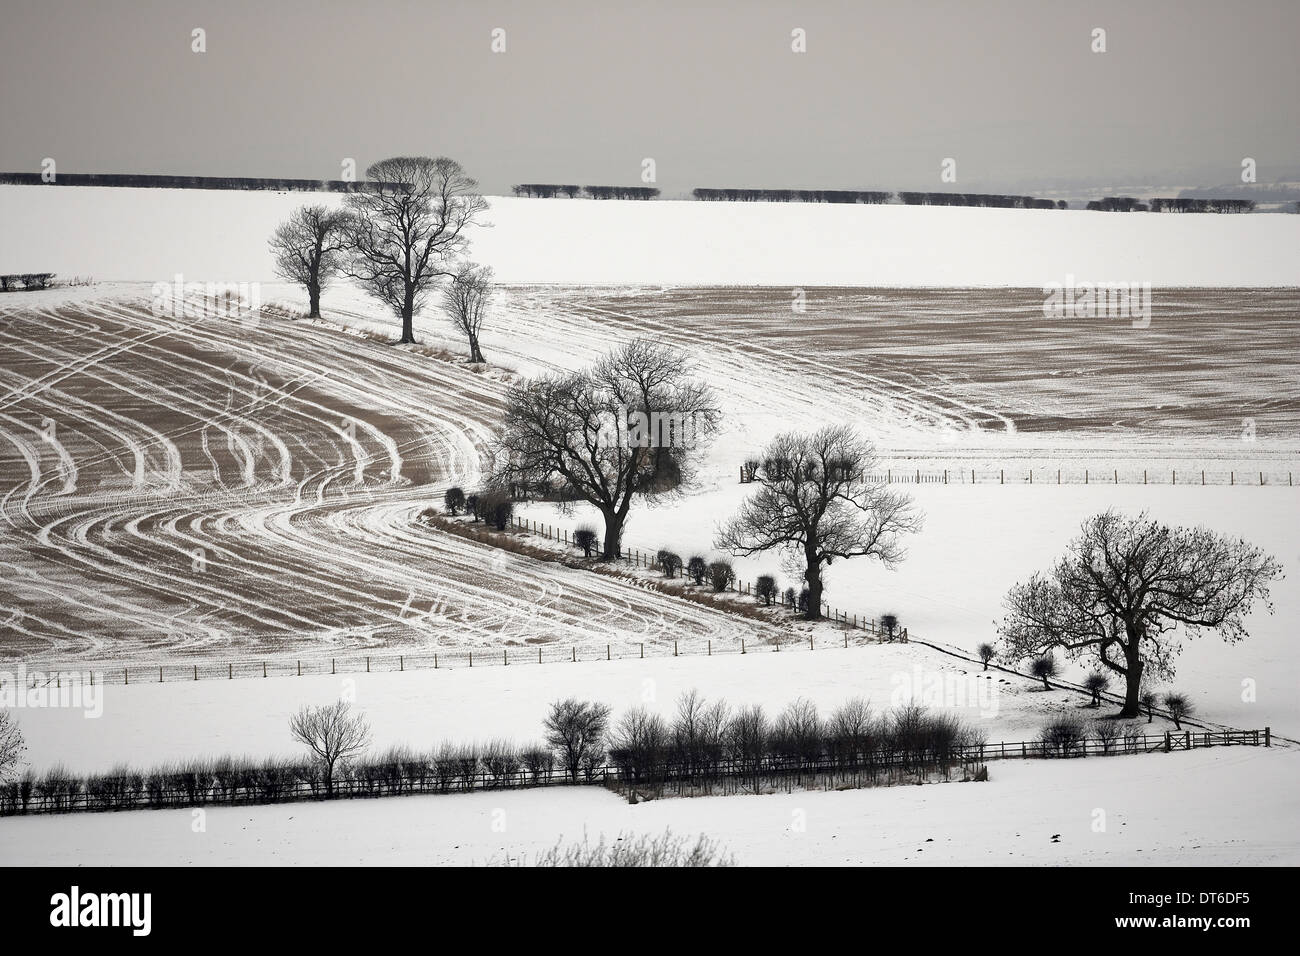 Snow covered farming landscape of the East Yorkshire Wolds near Wharram Percy Stock Photo